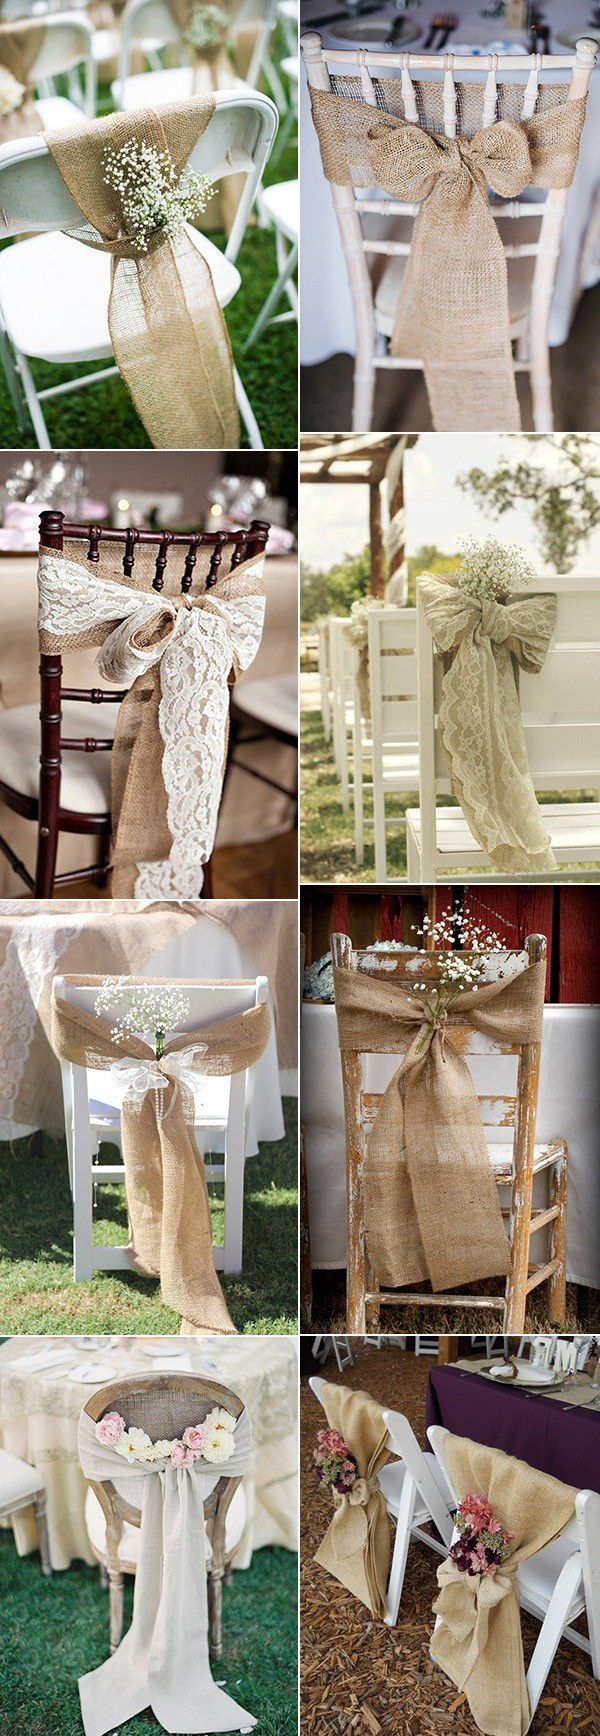 Wedding Chair Decorations
 28 Awesome Wedding Chair Decoration Ideas for Ceremony and